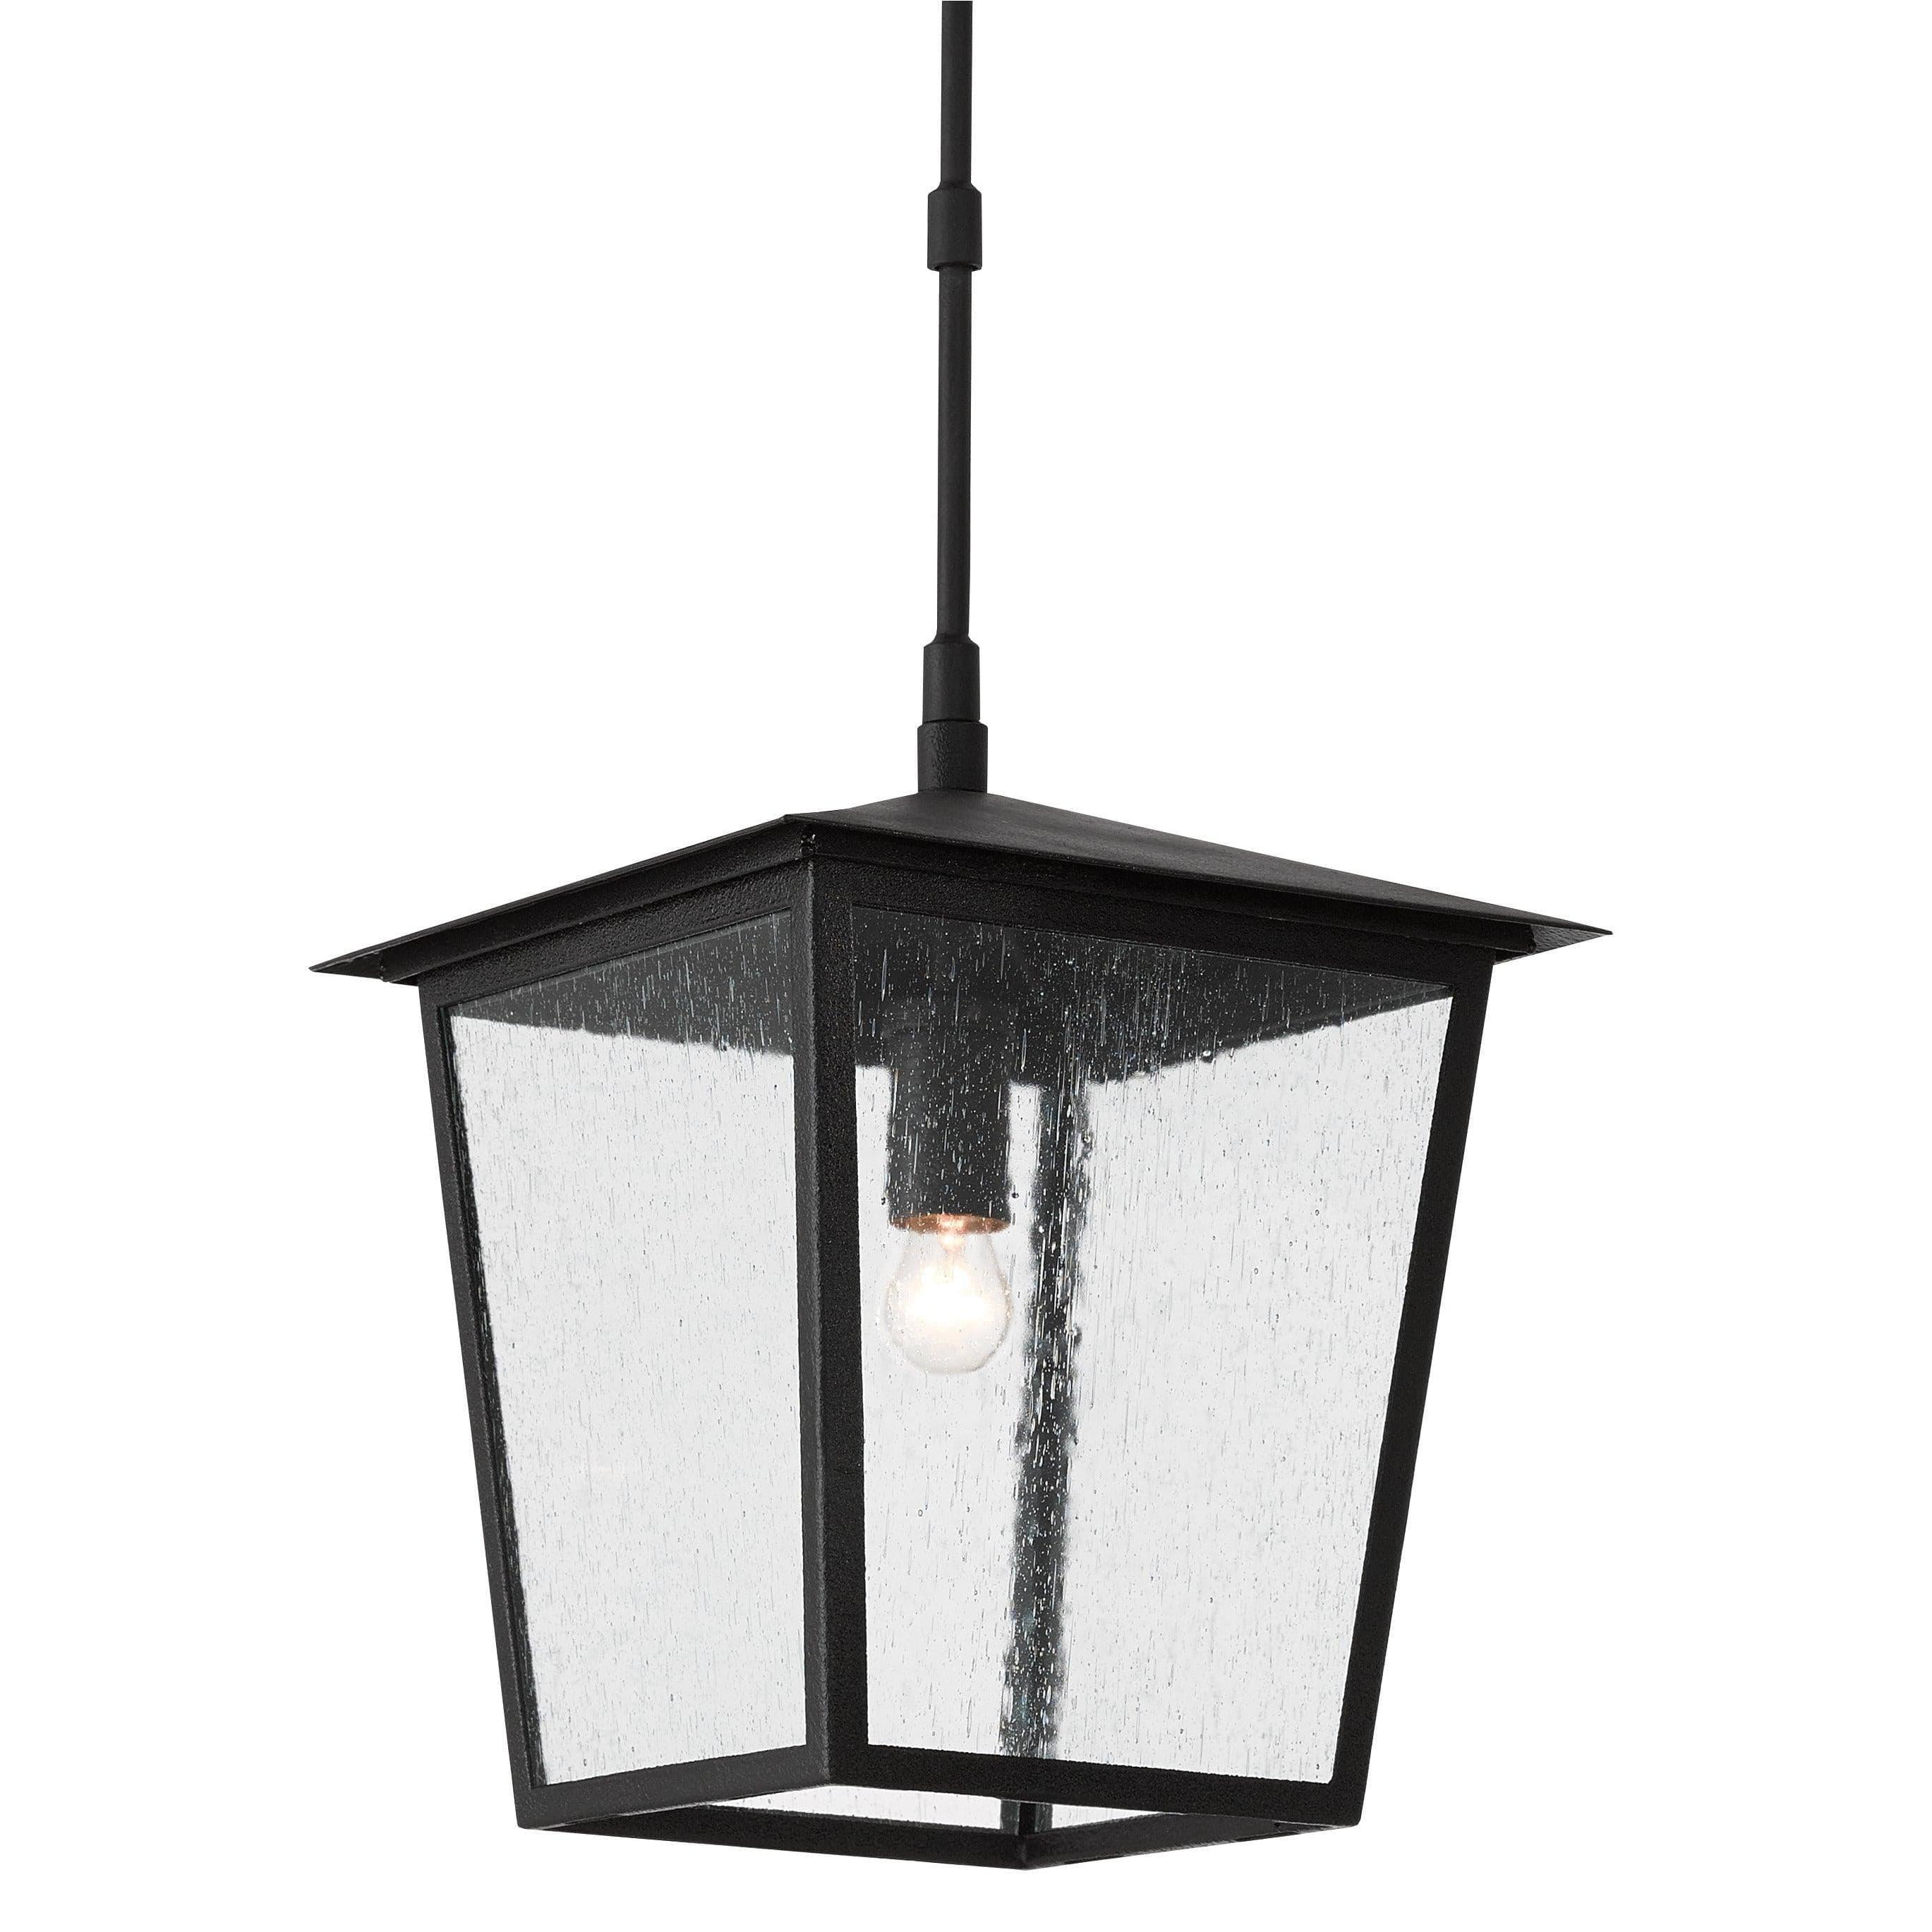 Currey and Company - Bening Outdoor Lantern - 9500-0001 | Montreal Lighting & Hardware